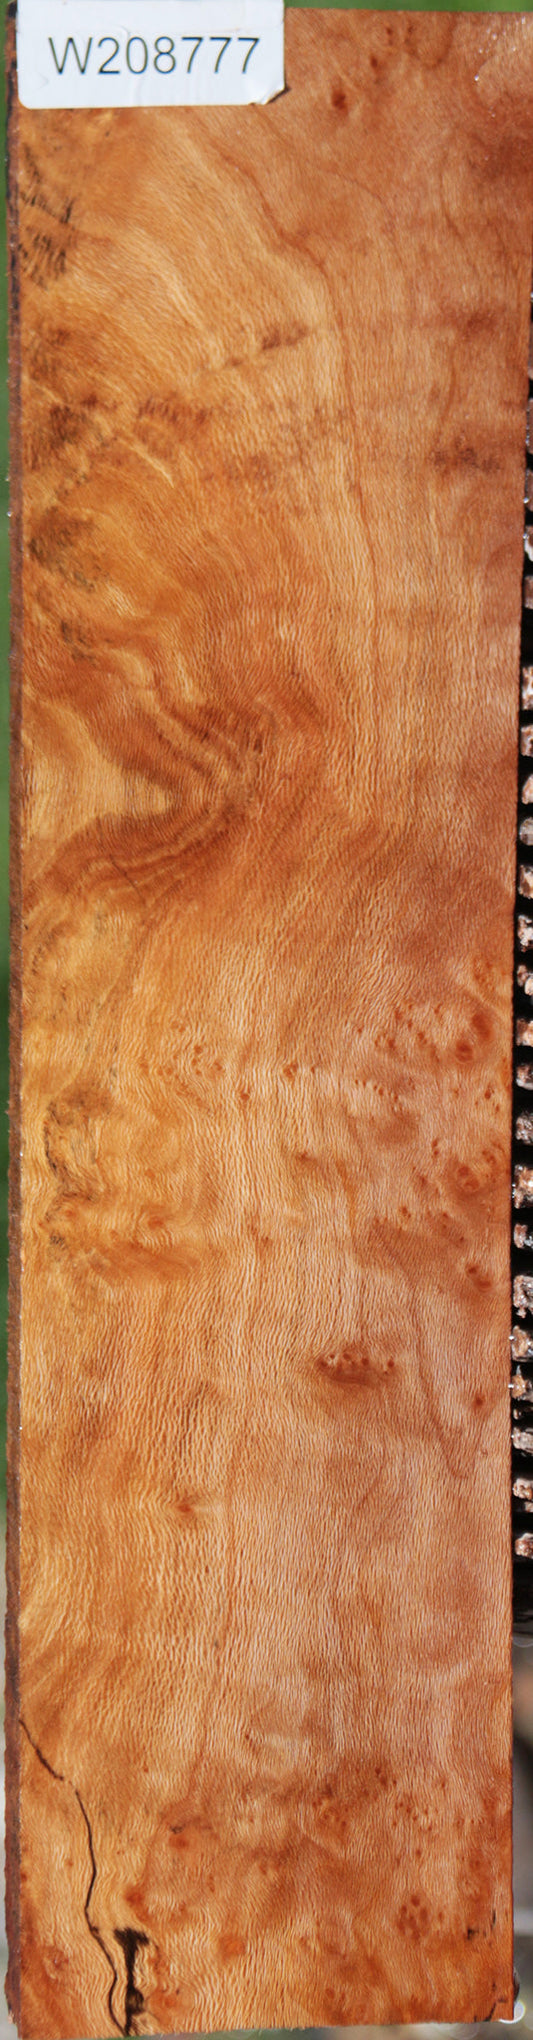 Spalted Sycamore Burl Lumber